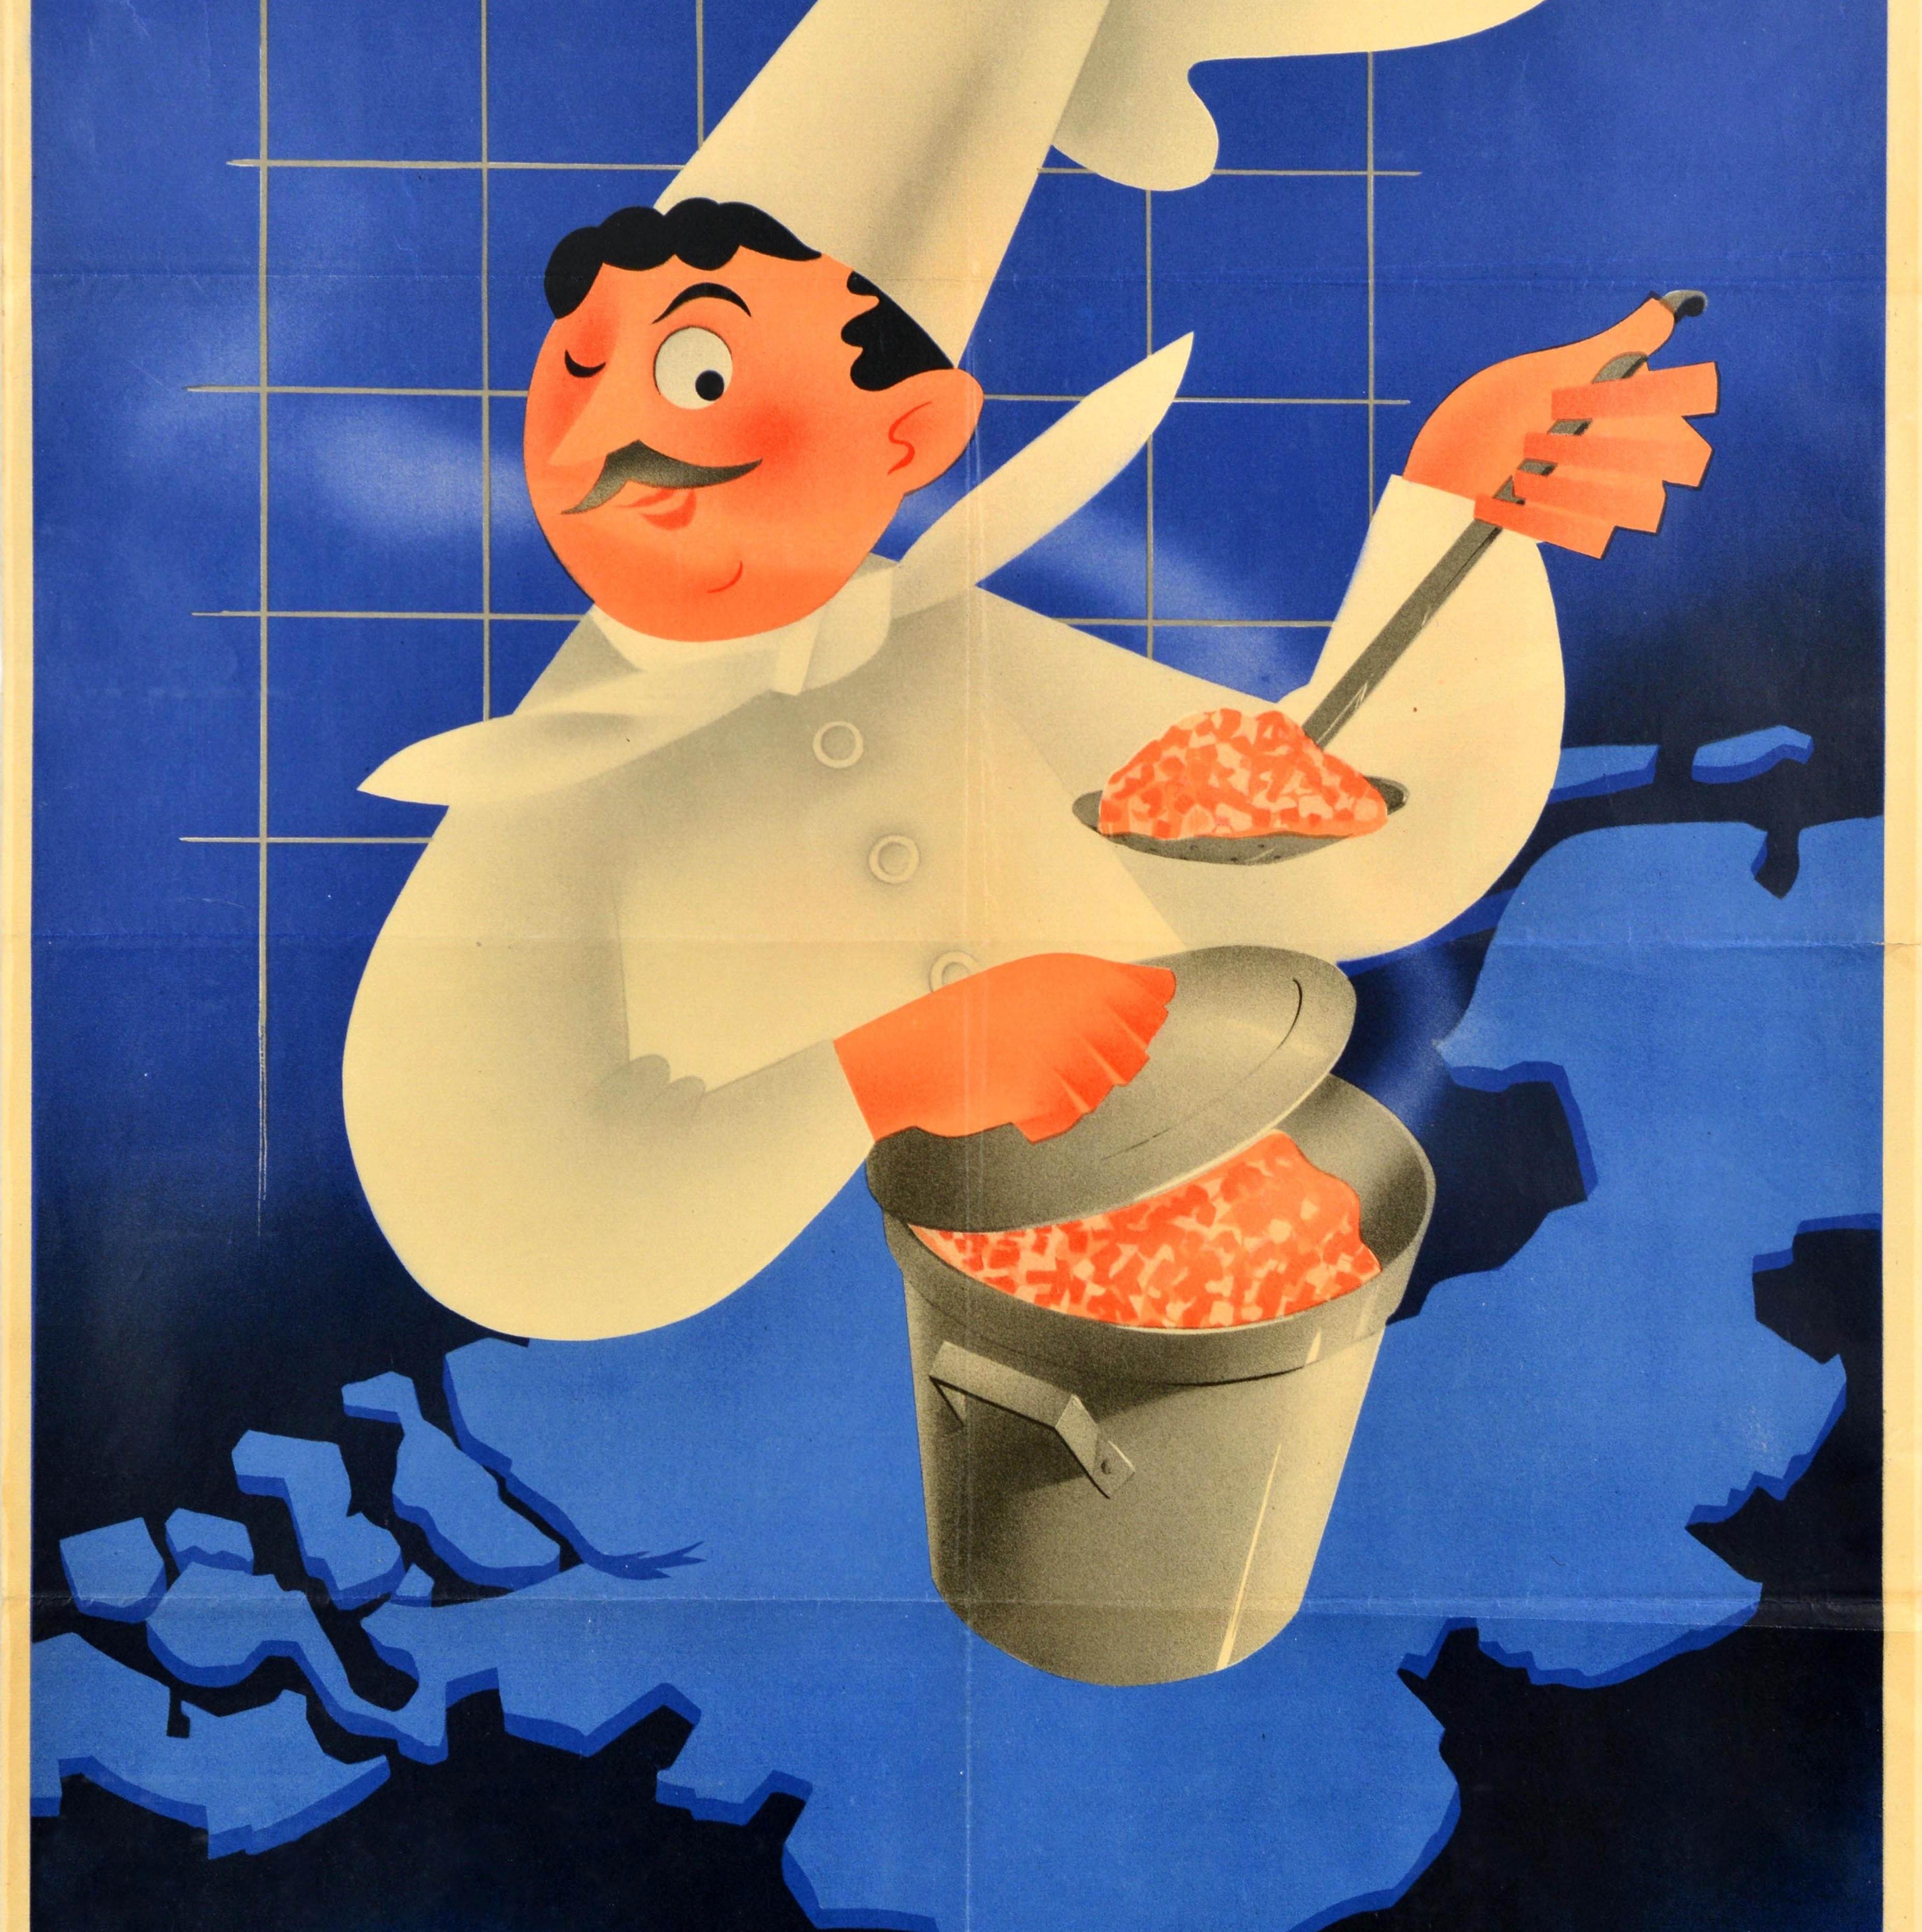 Original Vintage WWII Poster Central Kitchens War Food Centrale Keukens Map Chef In Good Condition For Sale In London, GB